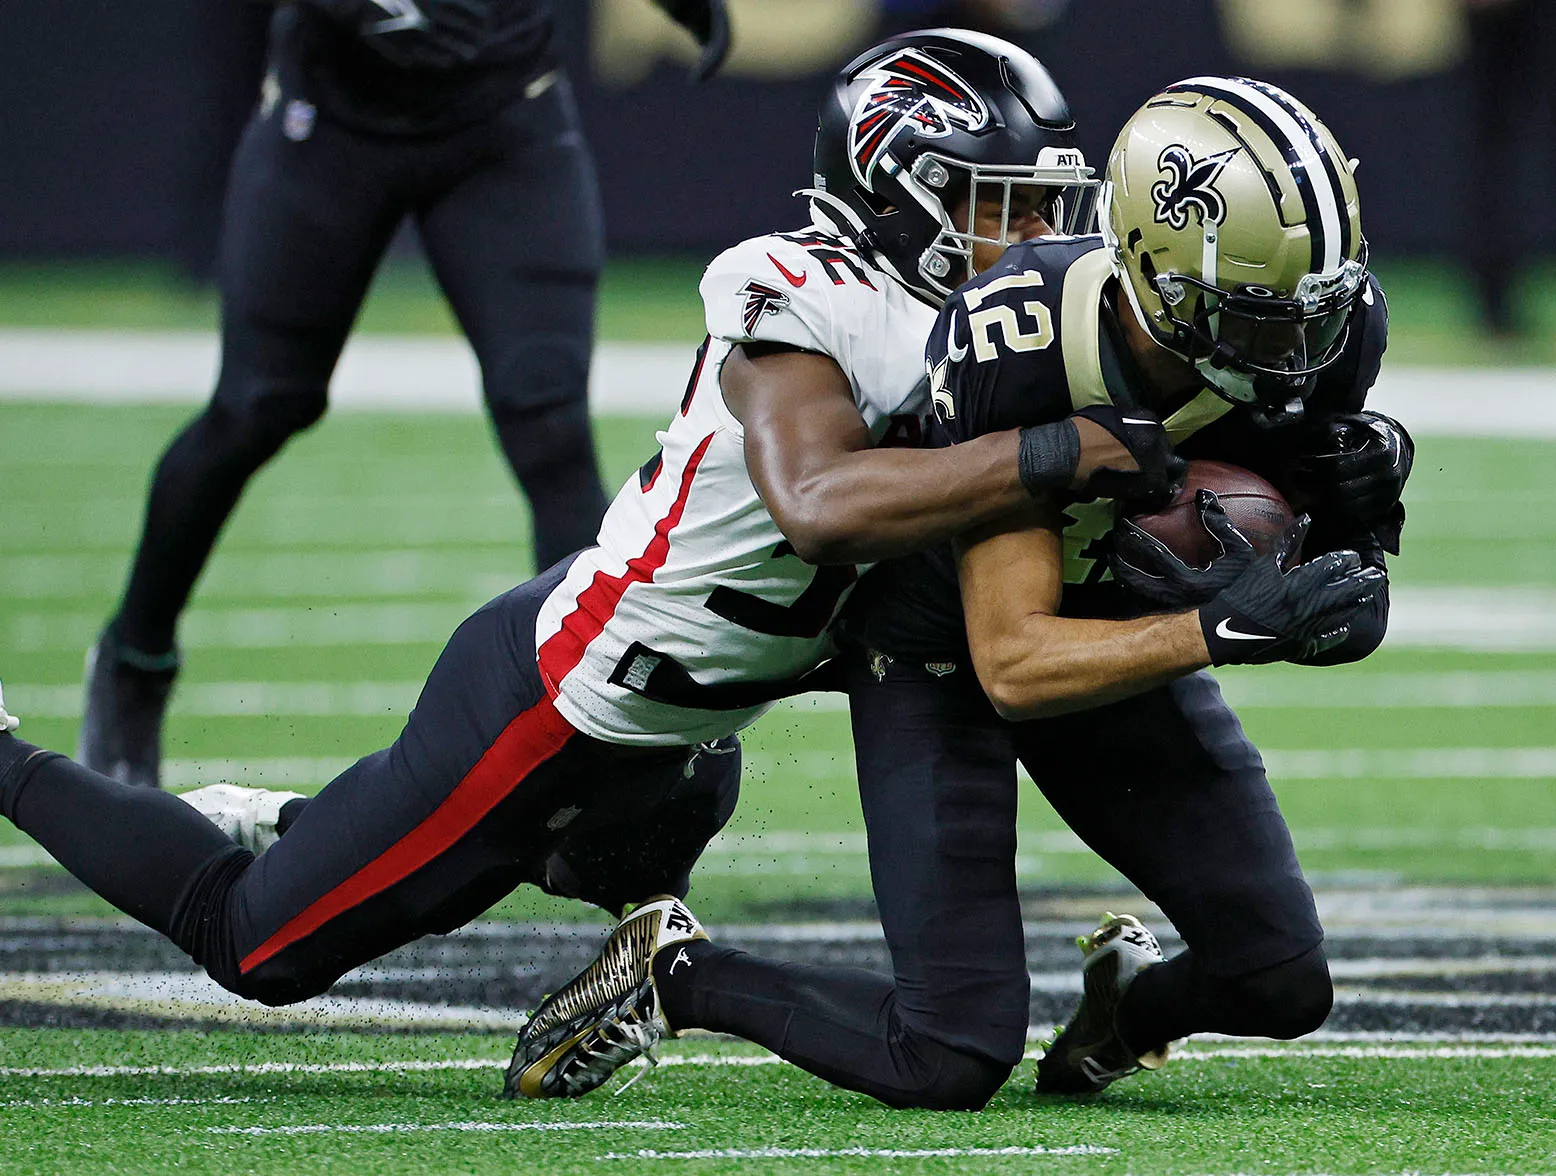 NEW ORLEANS, LOUISIANA - DECEMBER 18: Chris Olave #12 of the New Orleans Saints is tackled by Jaylinn Hawkins #32 of the Atlanta Falcons during the first half at Caesars Superdome on December 18, 2022 in New Orleans, Louisiana. (Photo by Chris Graythen/Getty Images)